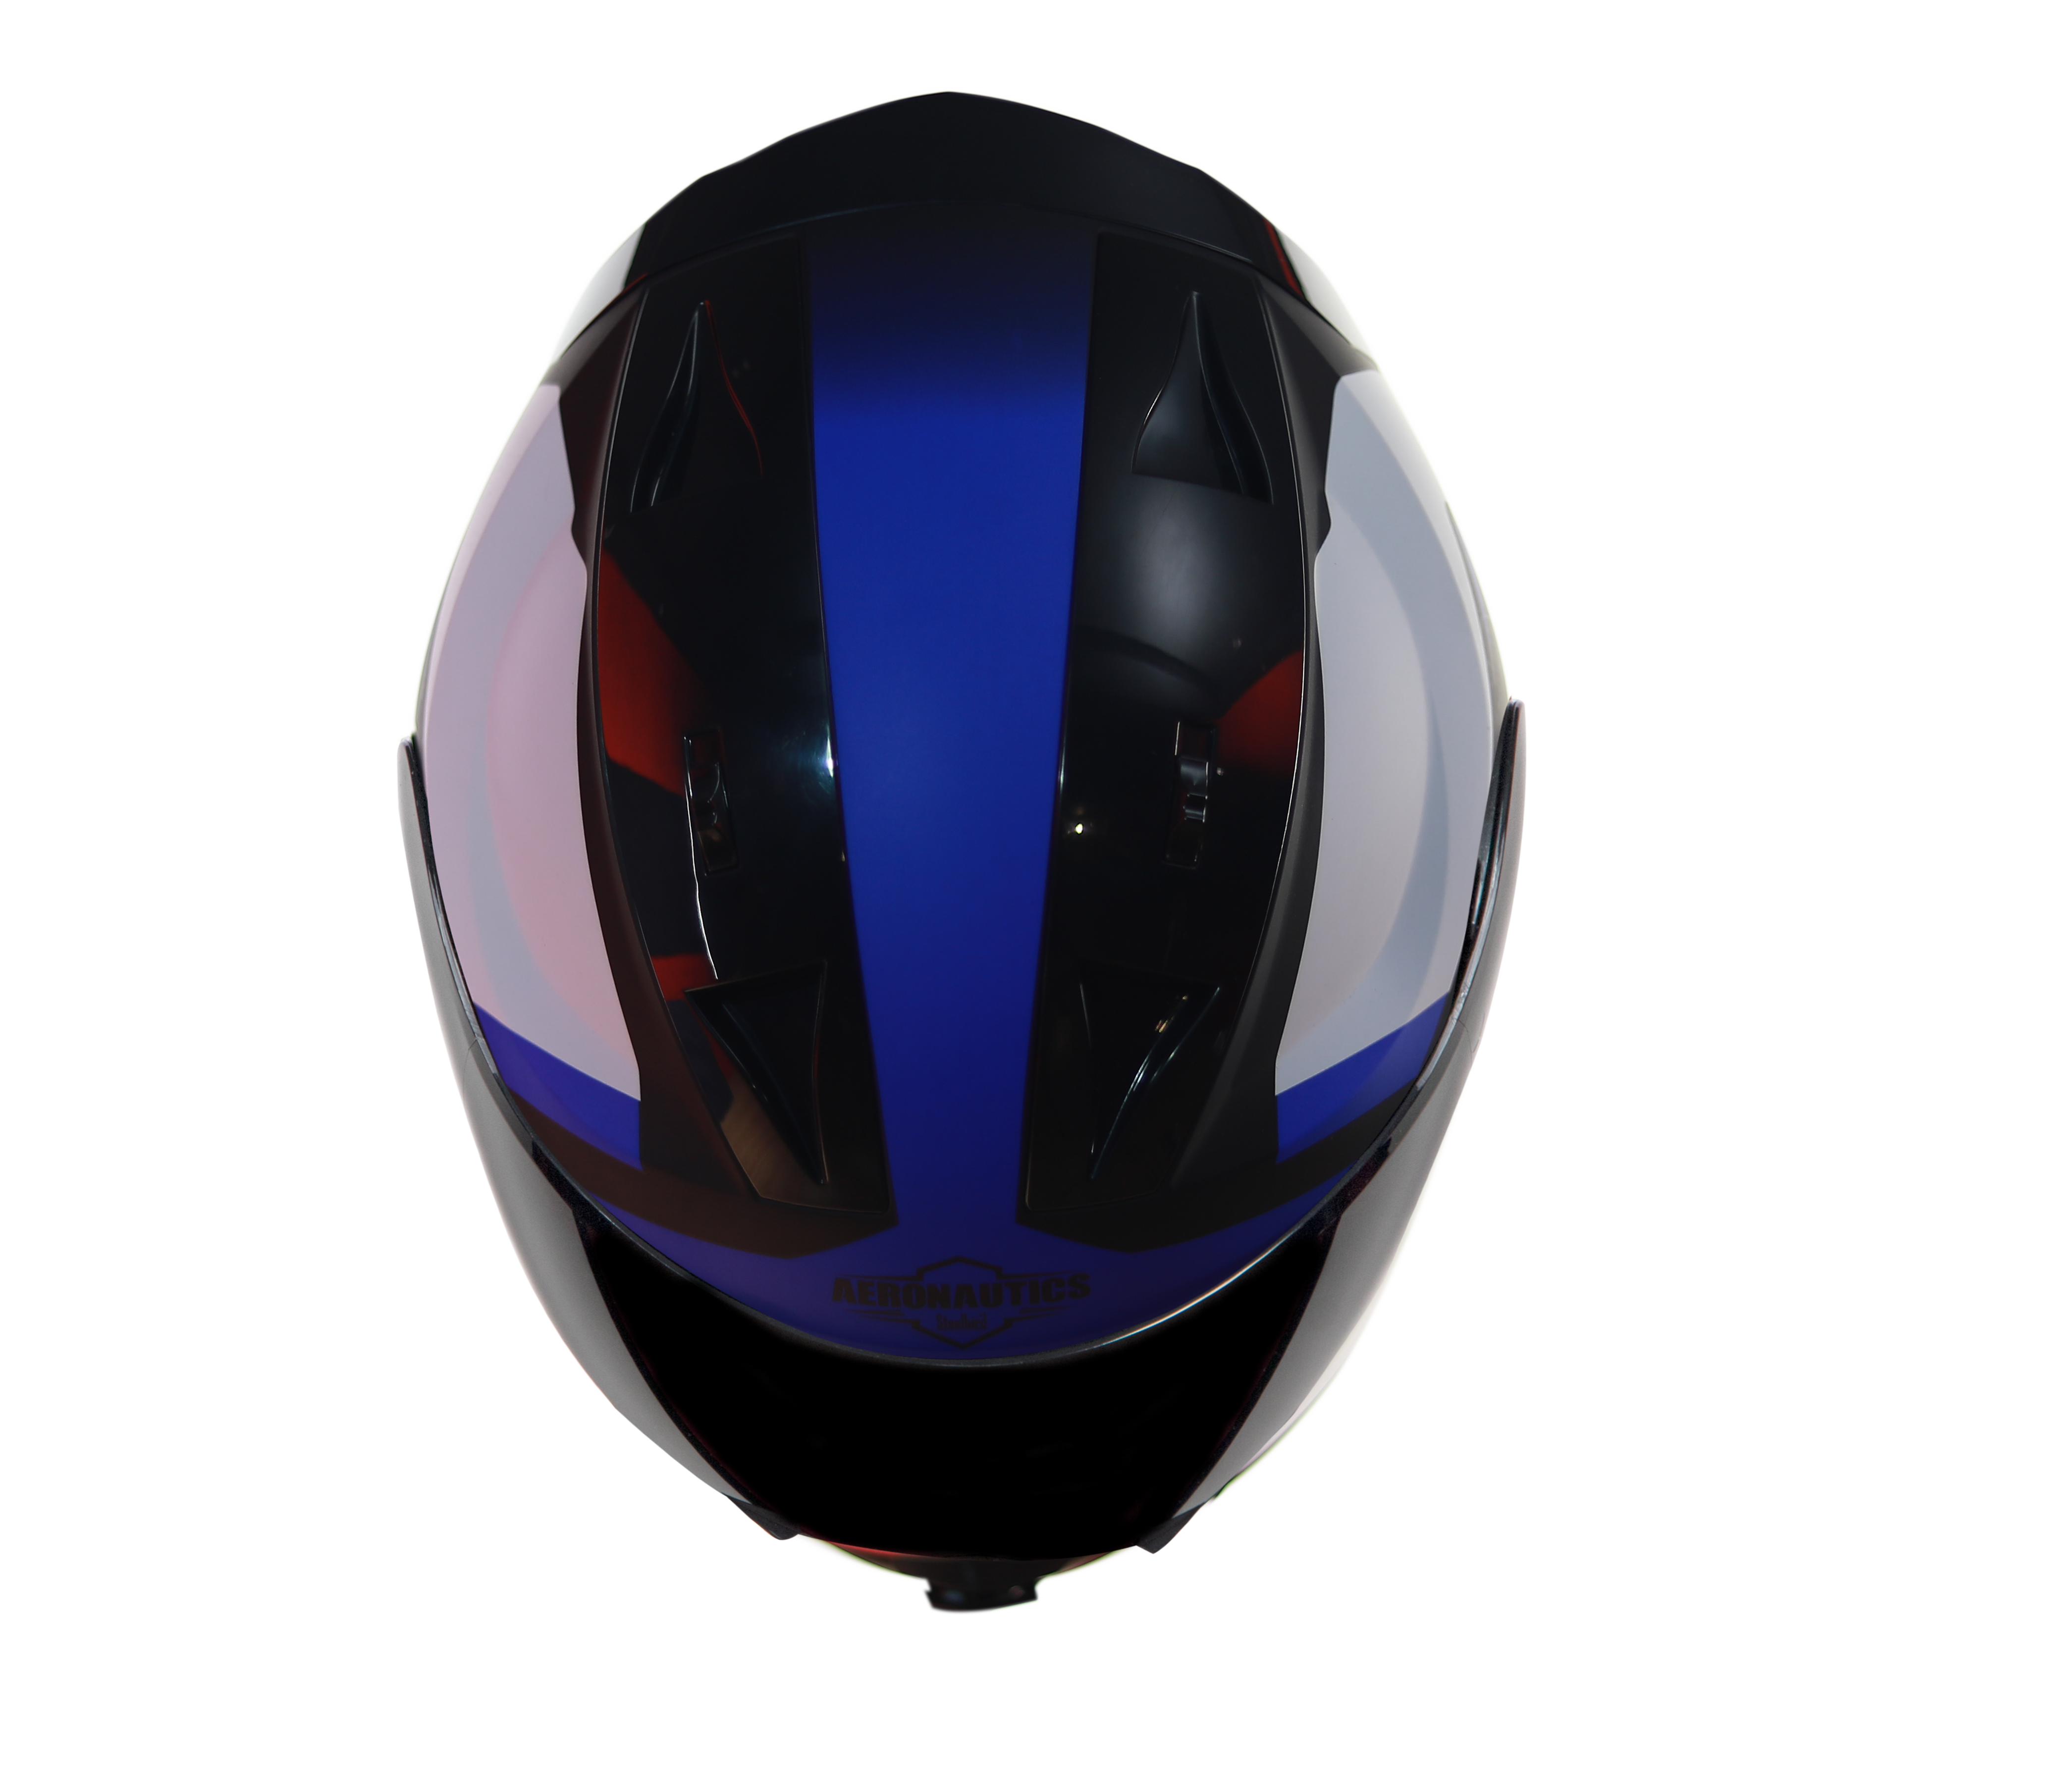 SA-1 Aerodynamics Mat Black With Blue(Fitted With Clear Visor Extra Gold Chrome Visor Free)